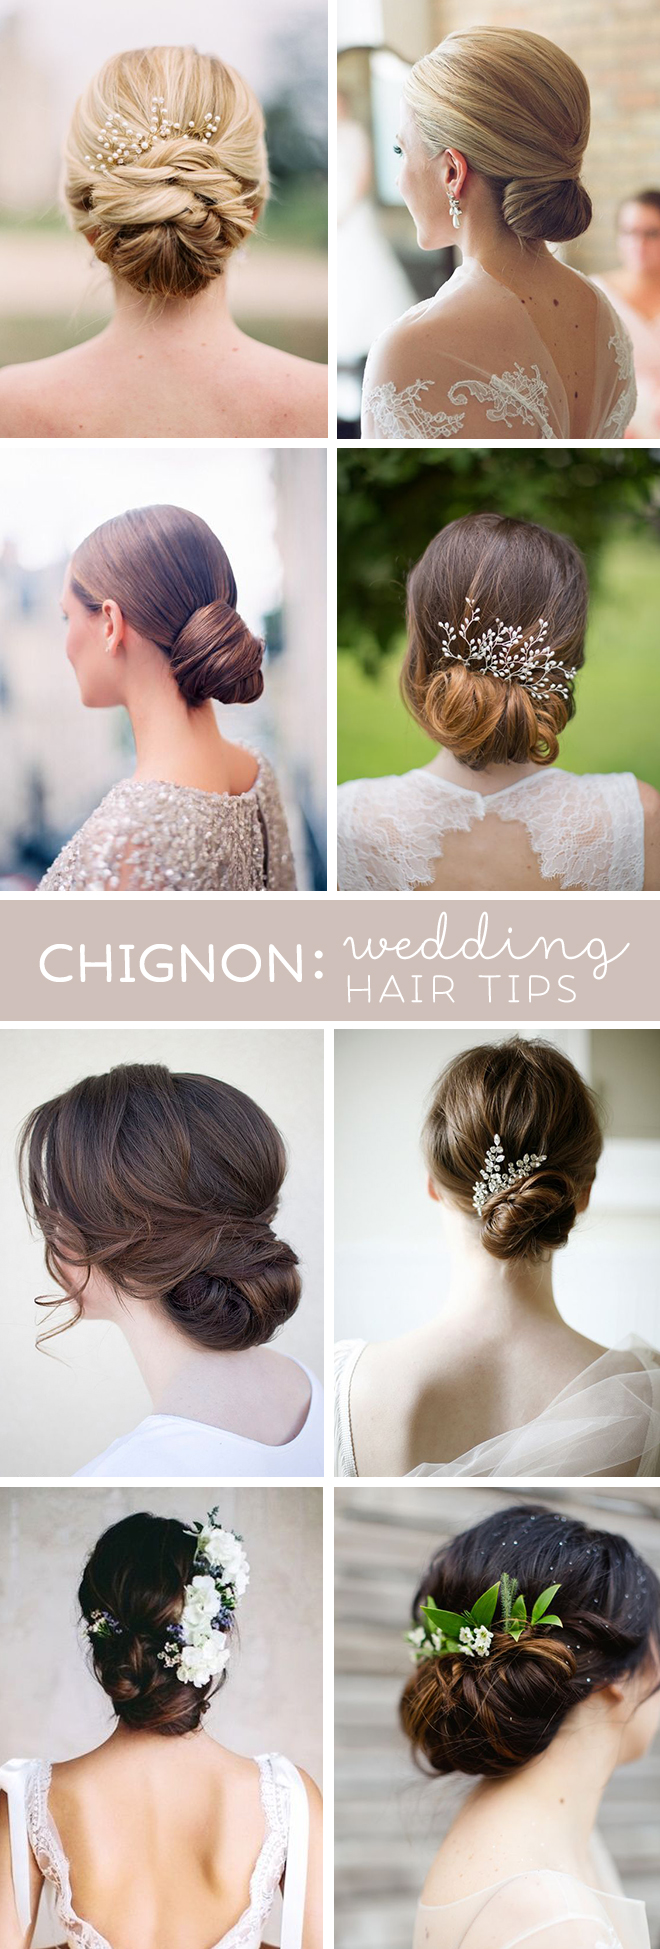 Awesome tips from a wedding hair professional about wearing a chignon or low bun for your wedding day hairstyle!